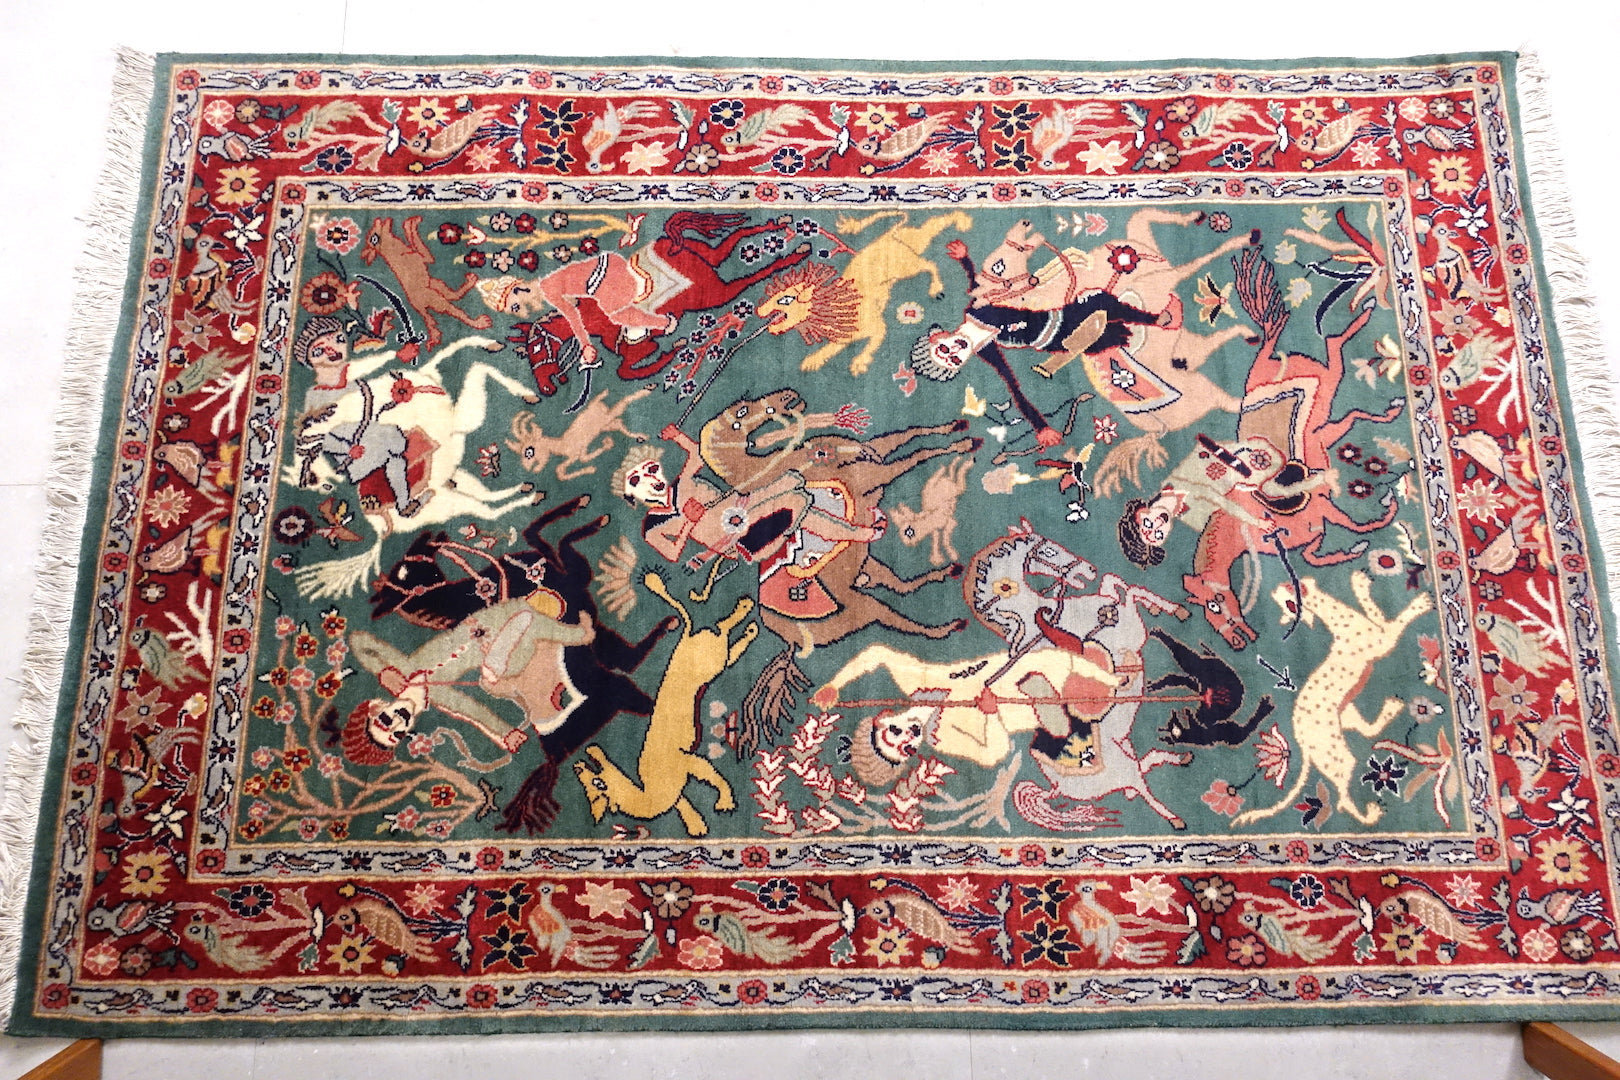 It is a 4 feet by 6 feet persian wool rug. It depicts a hunting scene and the colours used are gree,beige,red and black.